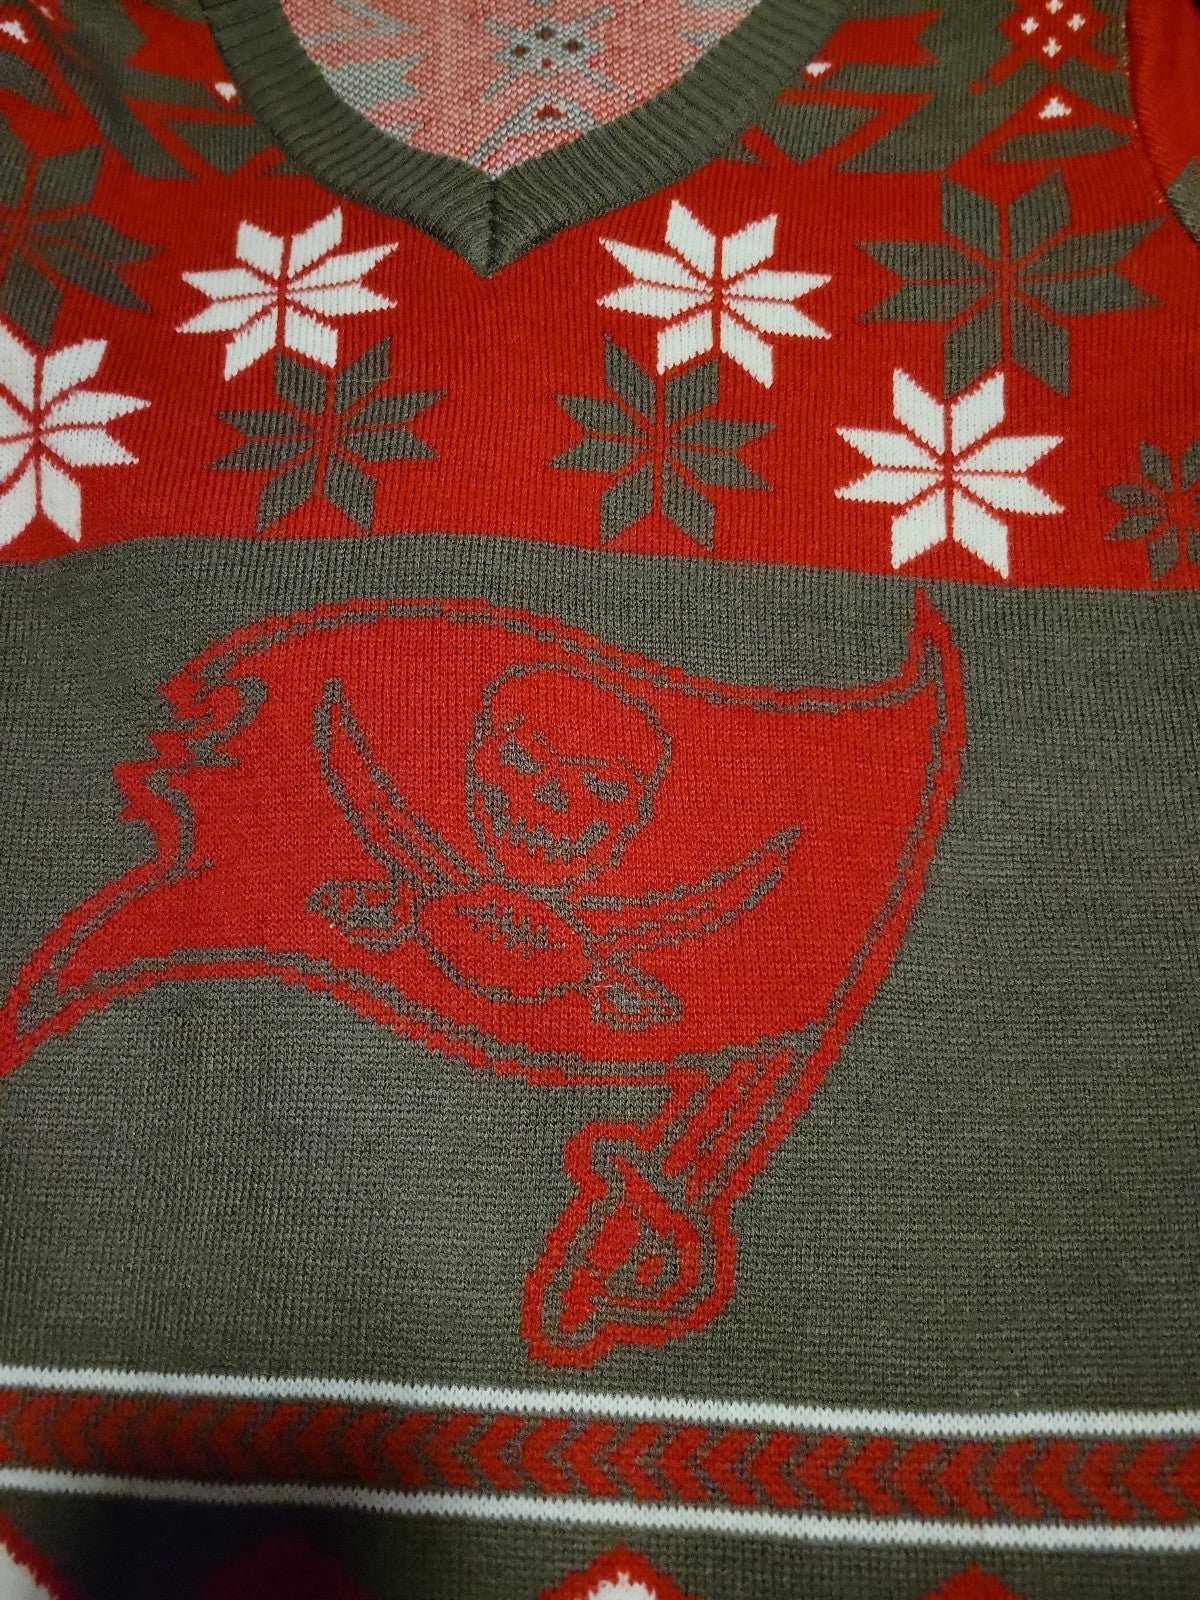 large discount Tampa Bay Buccaneers womens Christmas sweater Ht3HOJZm4 for sale